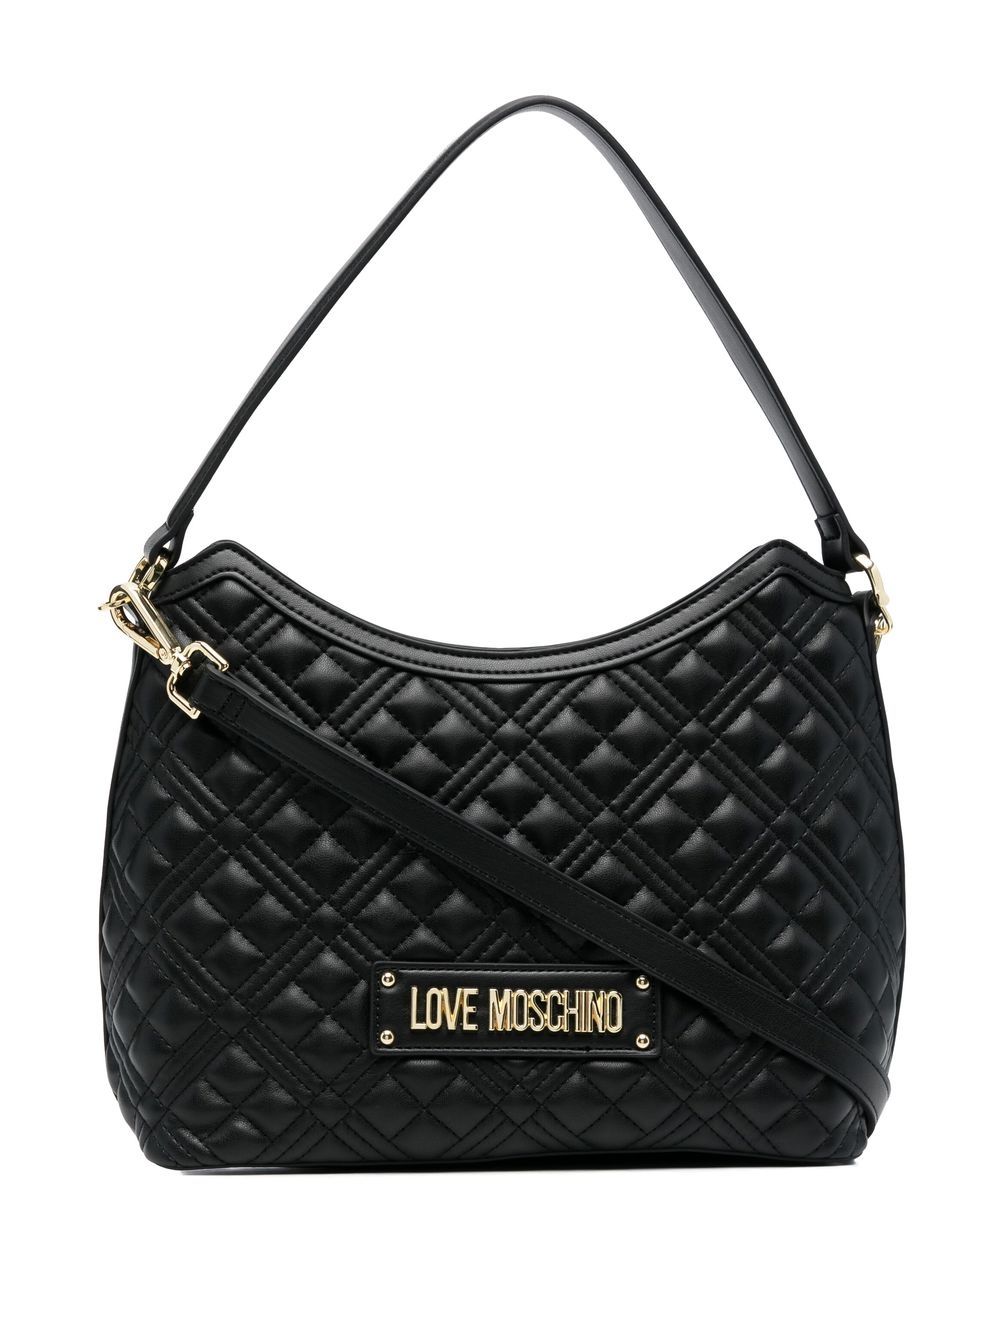 Love Moschino Diamond Quilted Tote Bag - Farfetch